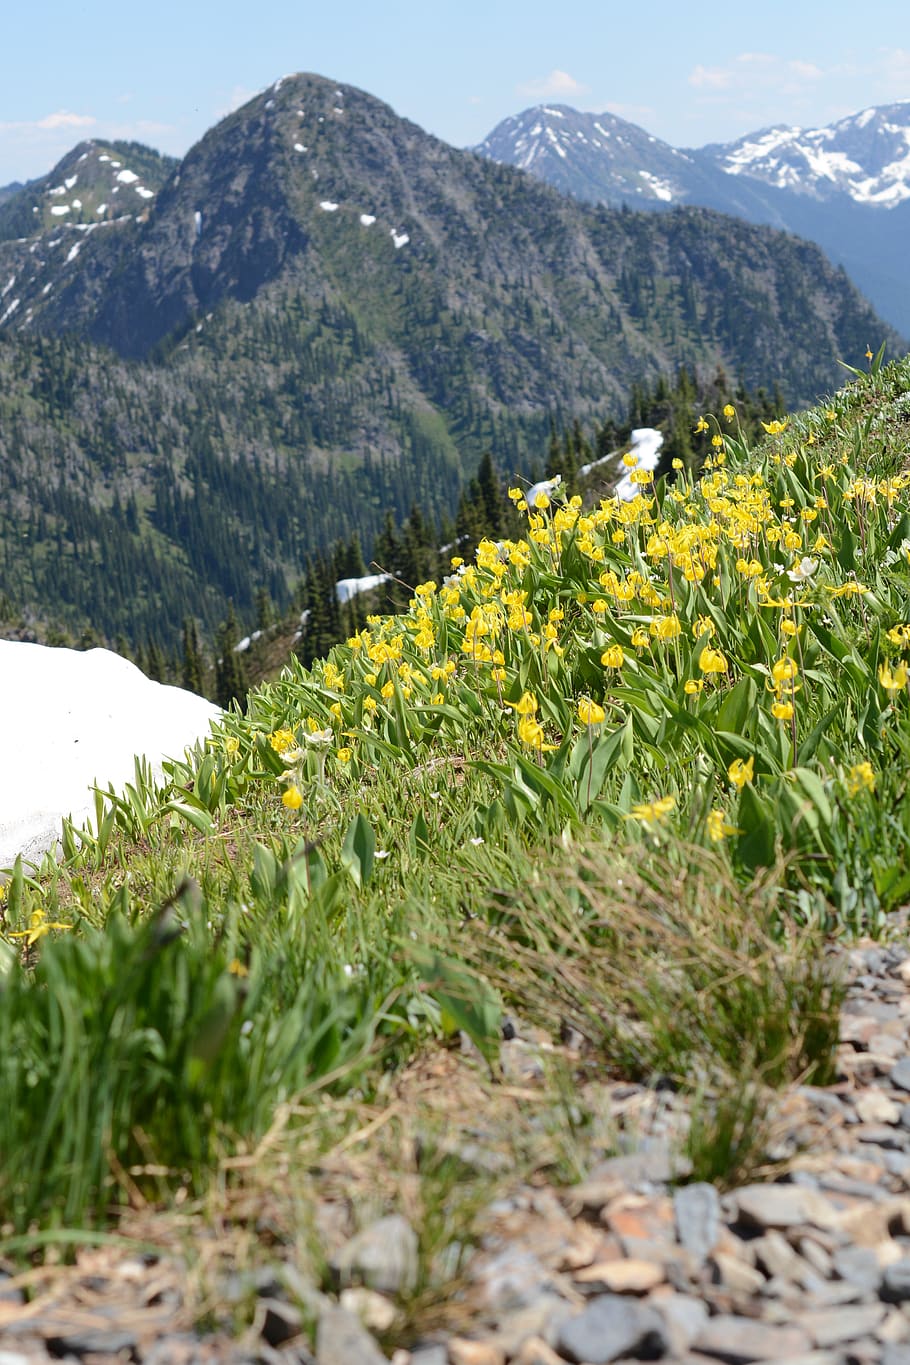 easter lilies, easter lily, lily, lilies, mountain, snow, canada, british columbia, plant, beauty in nature